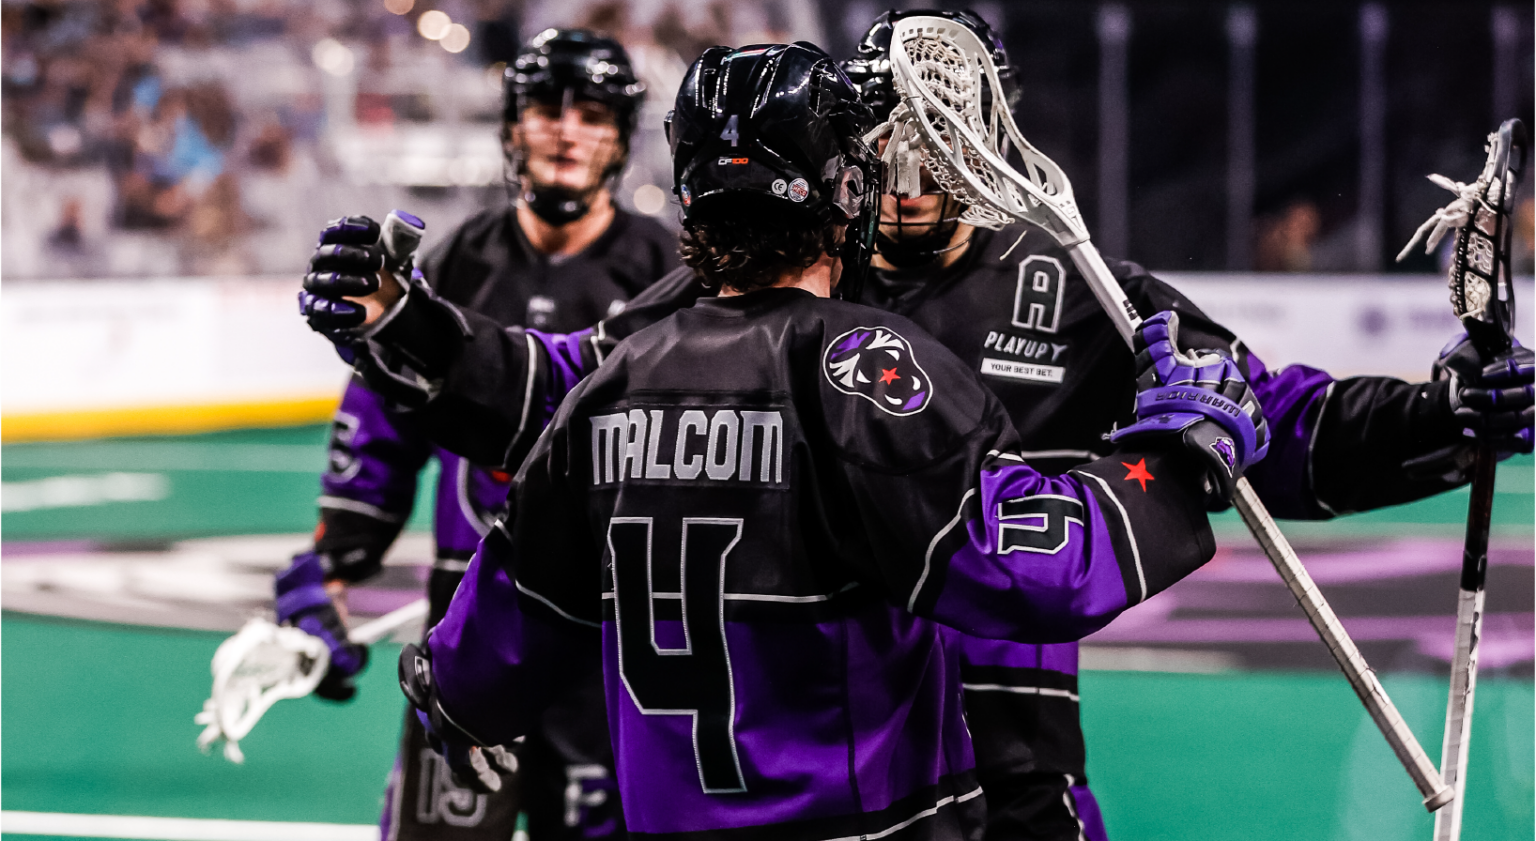 Panther City Lacrosse Club Defeats Las Vegas Desert Dogs in Home Opener